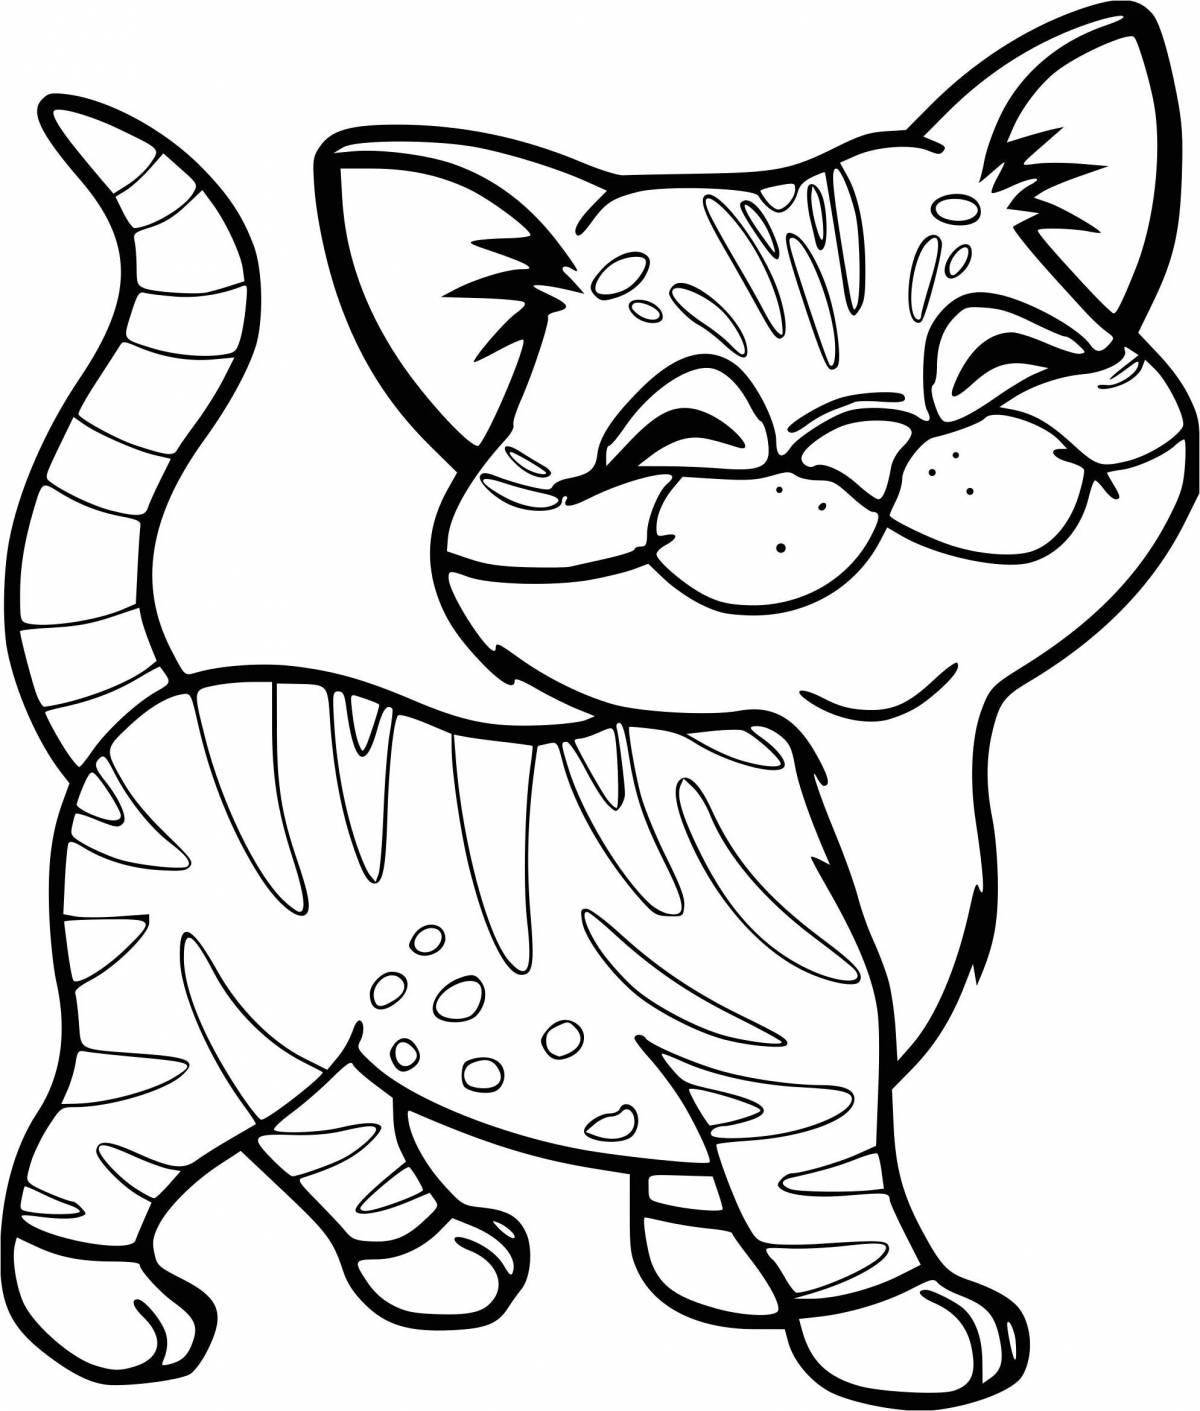 Snuggly kitten coloring book for kids